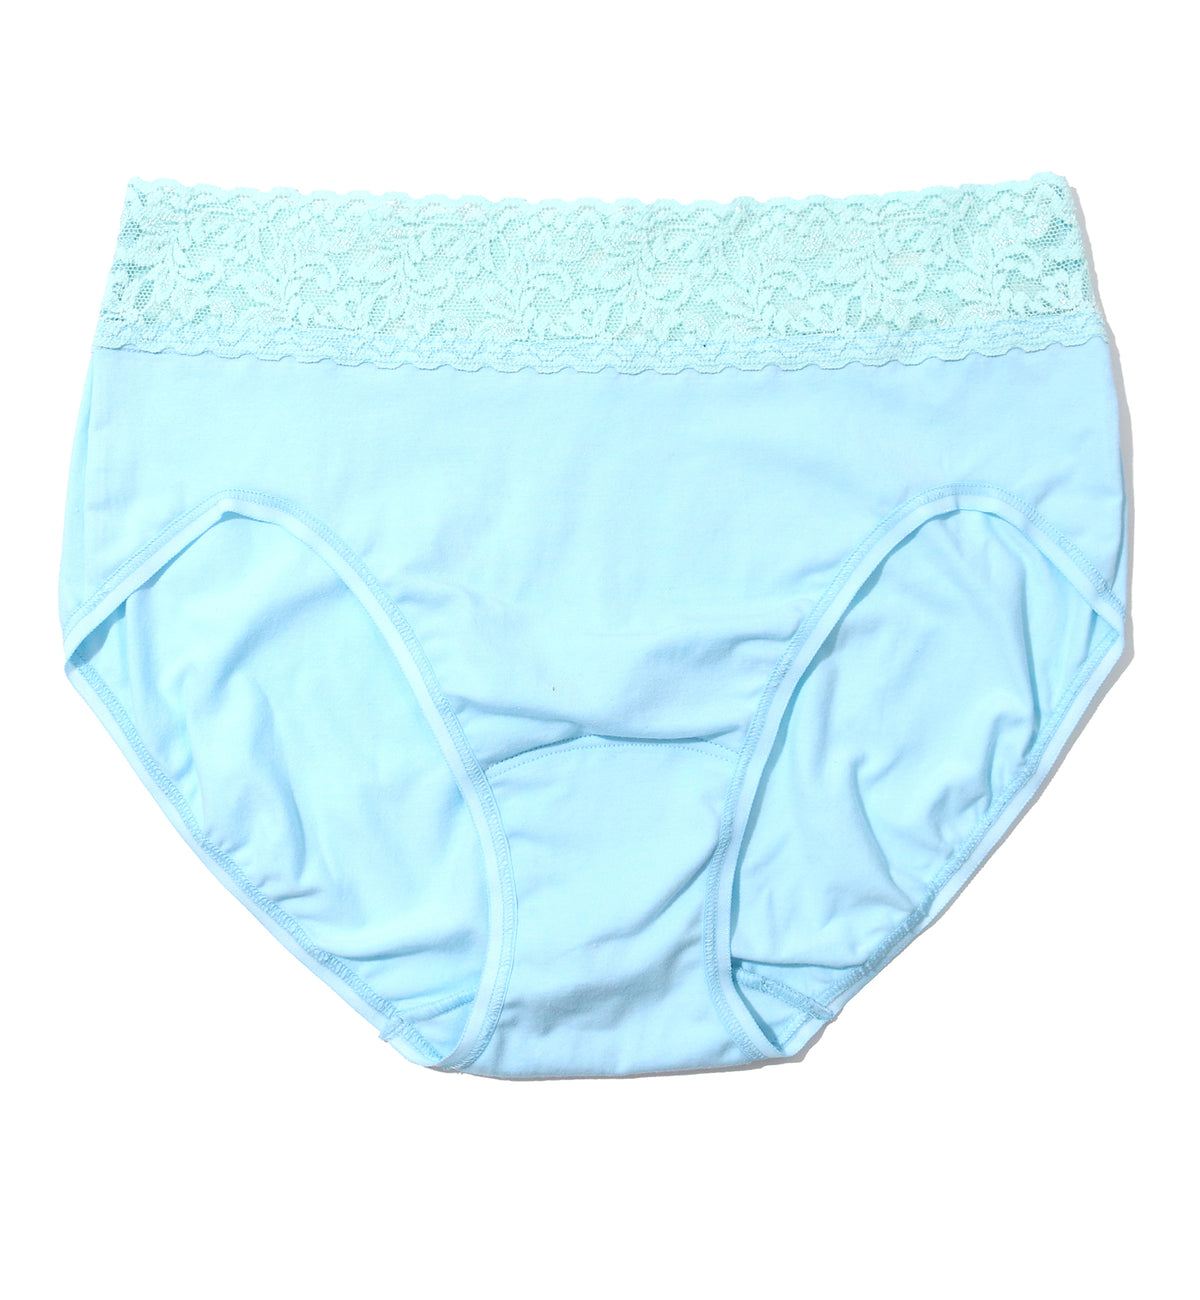 Hanky Panky Cotton French Brief with Lace (892461),Small,Butterfly Blue - Butterfly Blue,Small